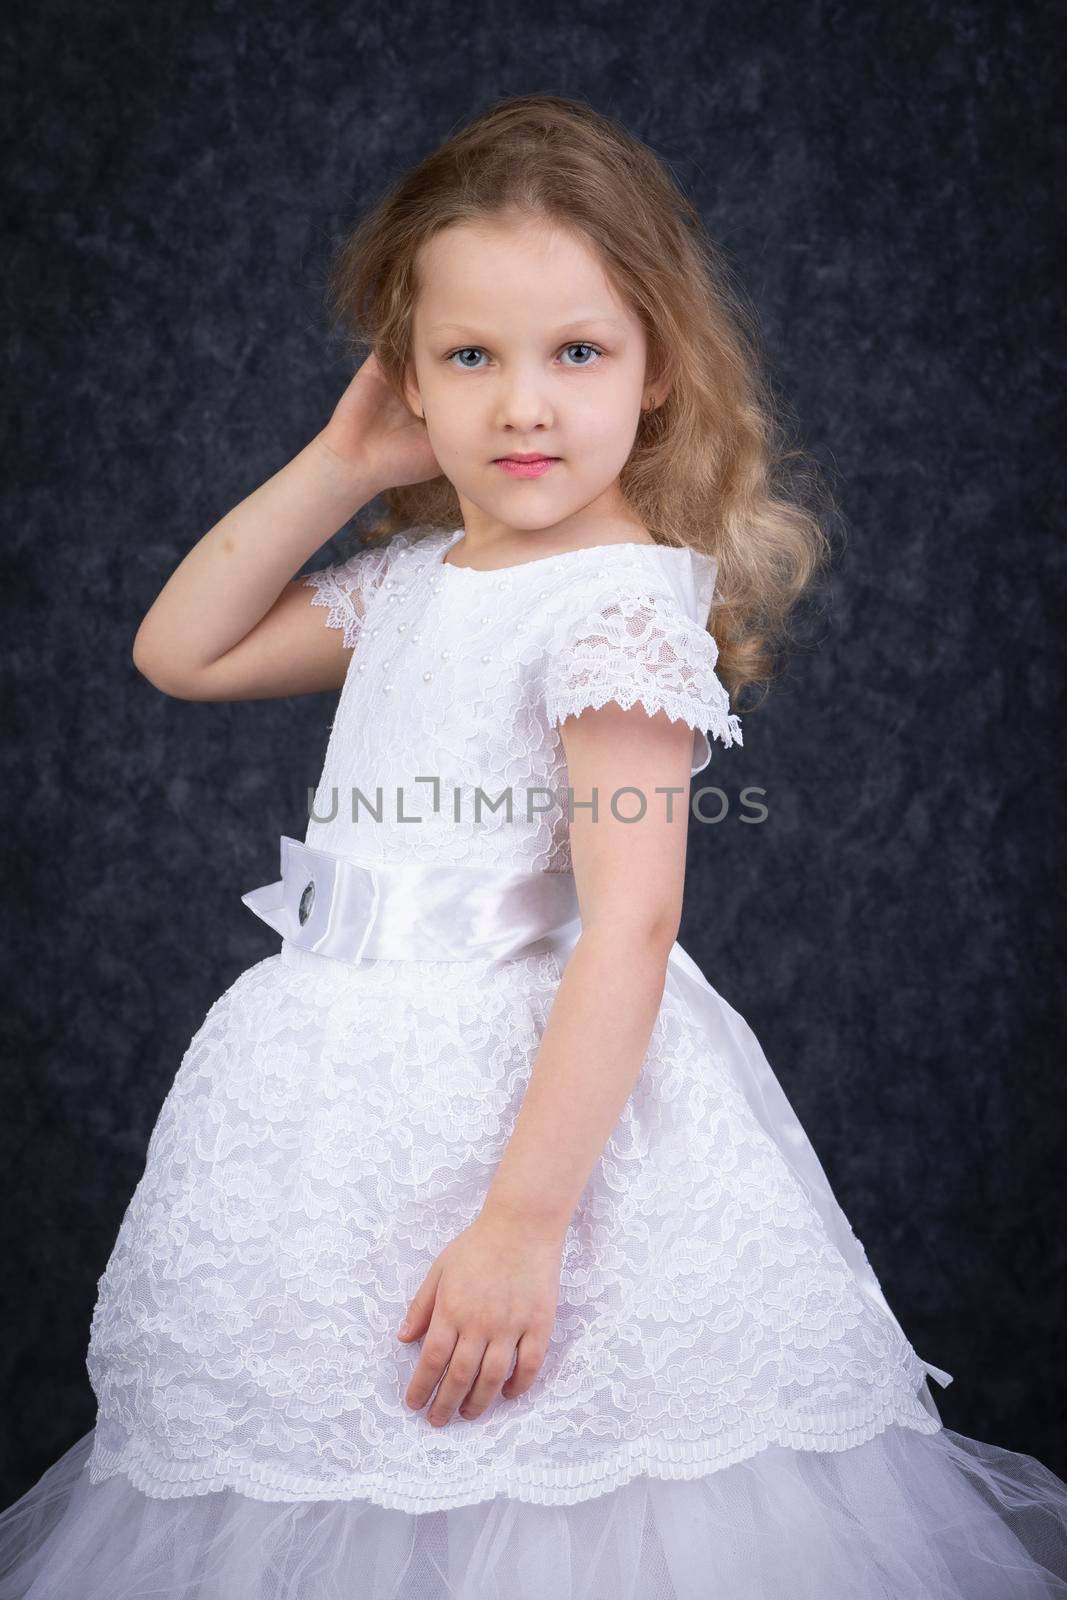 Cute little blonde girl in a beautiful white dress on a dark background. Six year old beautiful girl